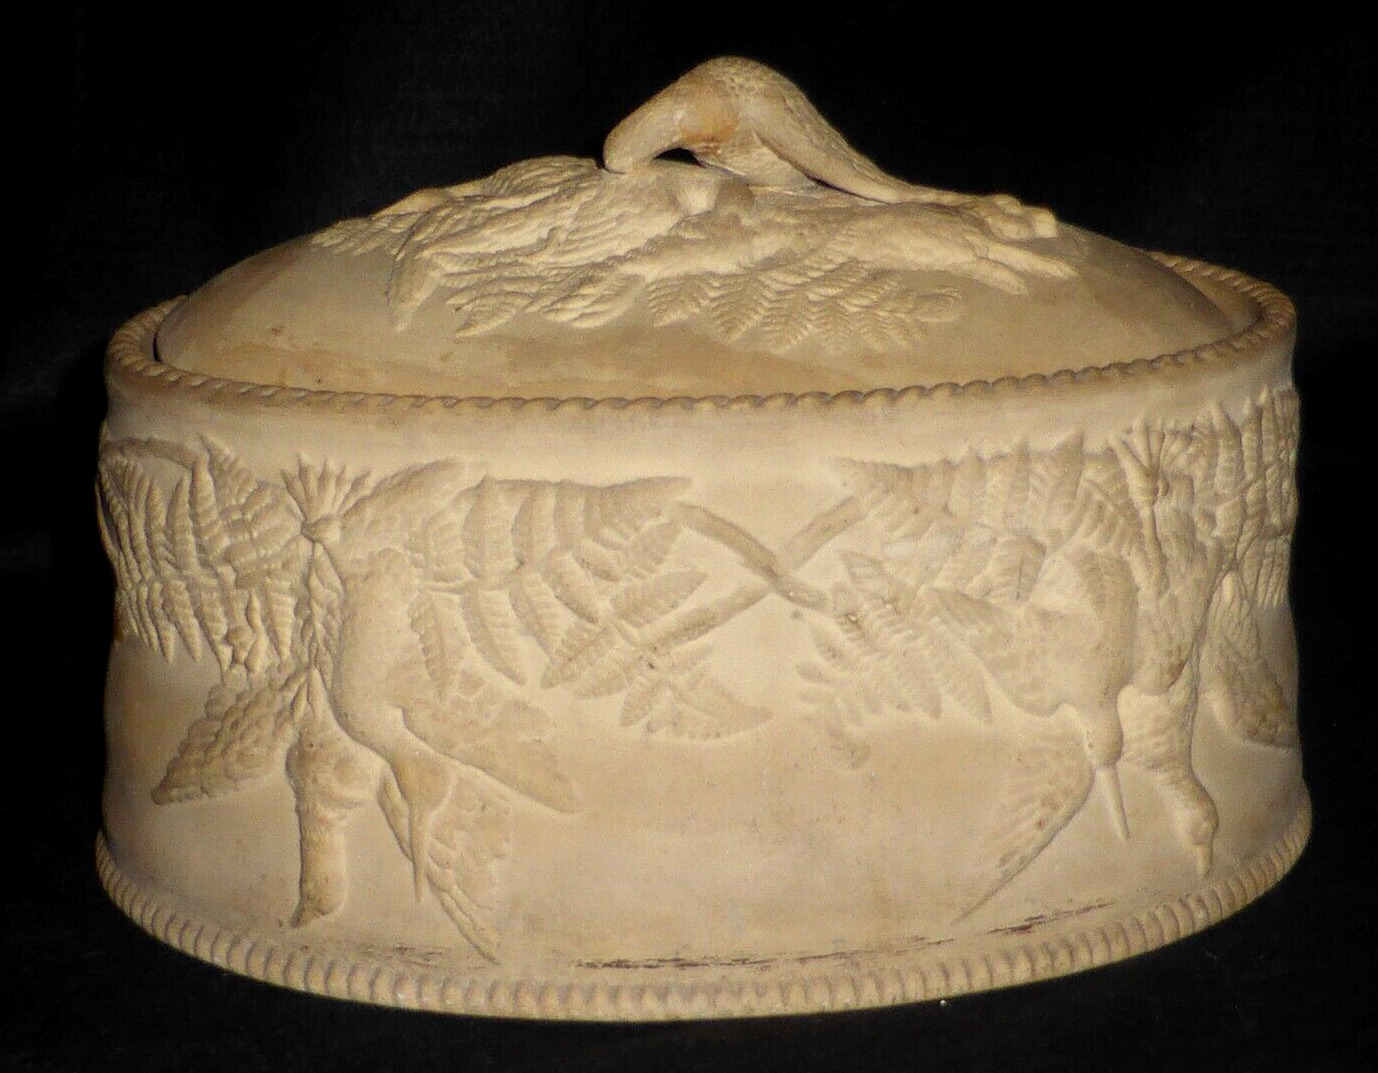 Antique Wedgwood Caneware Game Pie Dish with Pheasant Finial Handle c1860